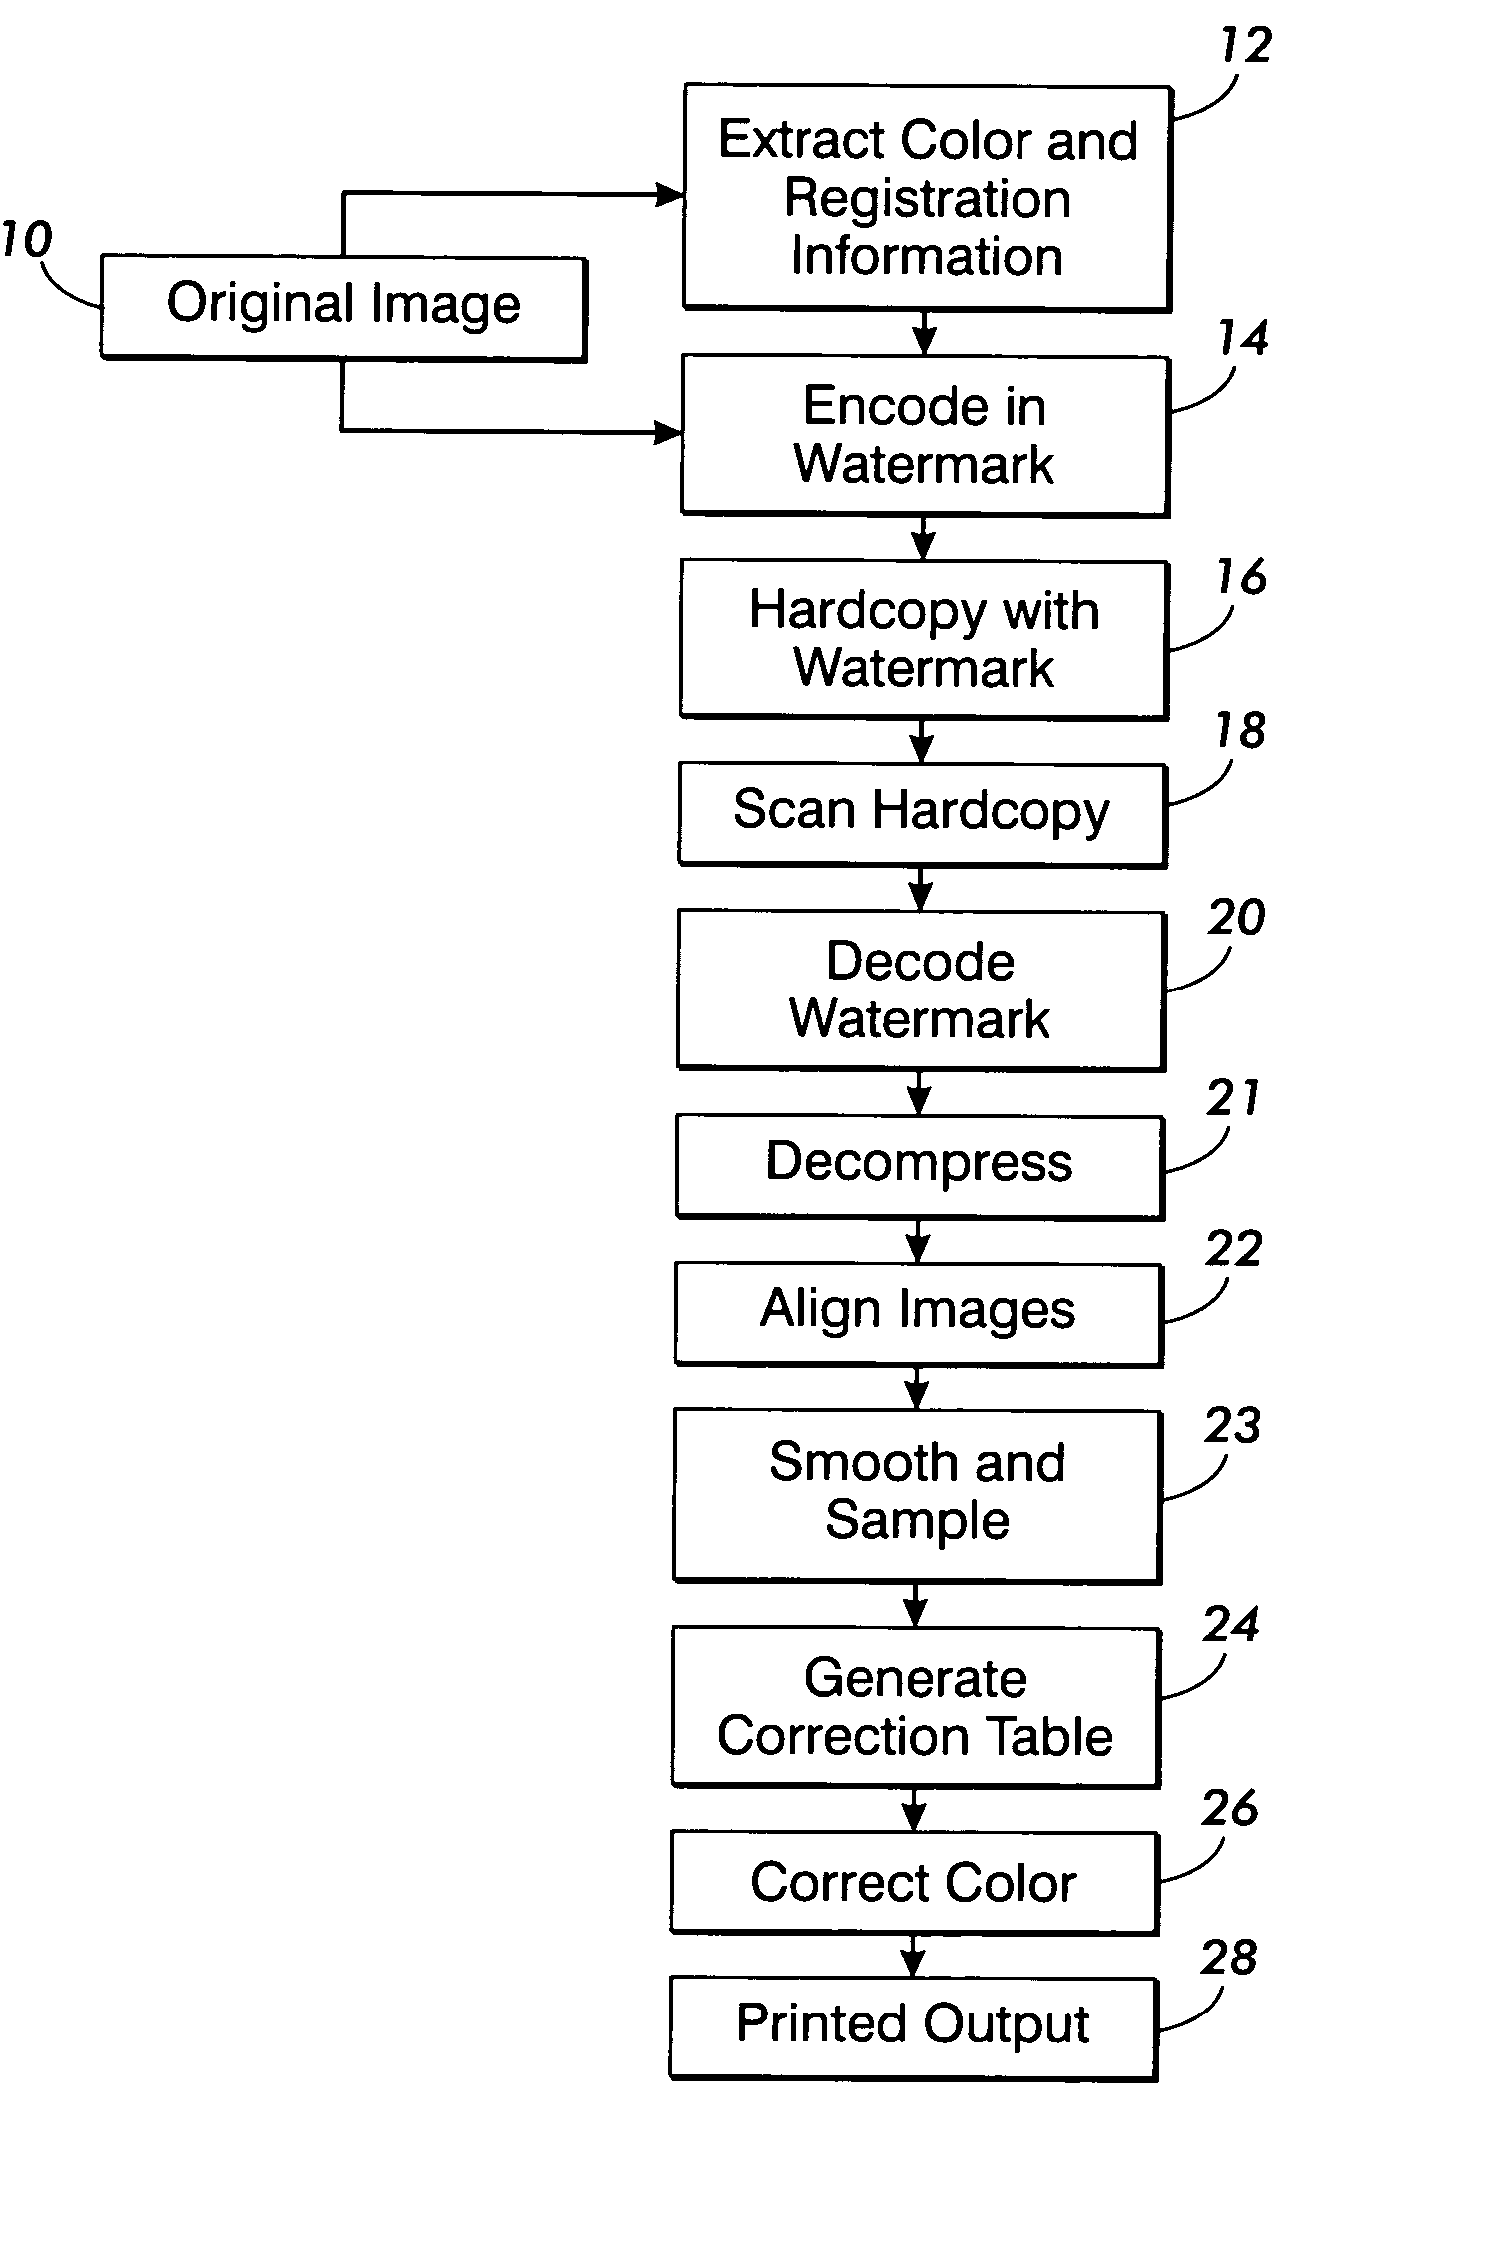 Method of embedding color information in printed documents using watermarking